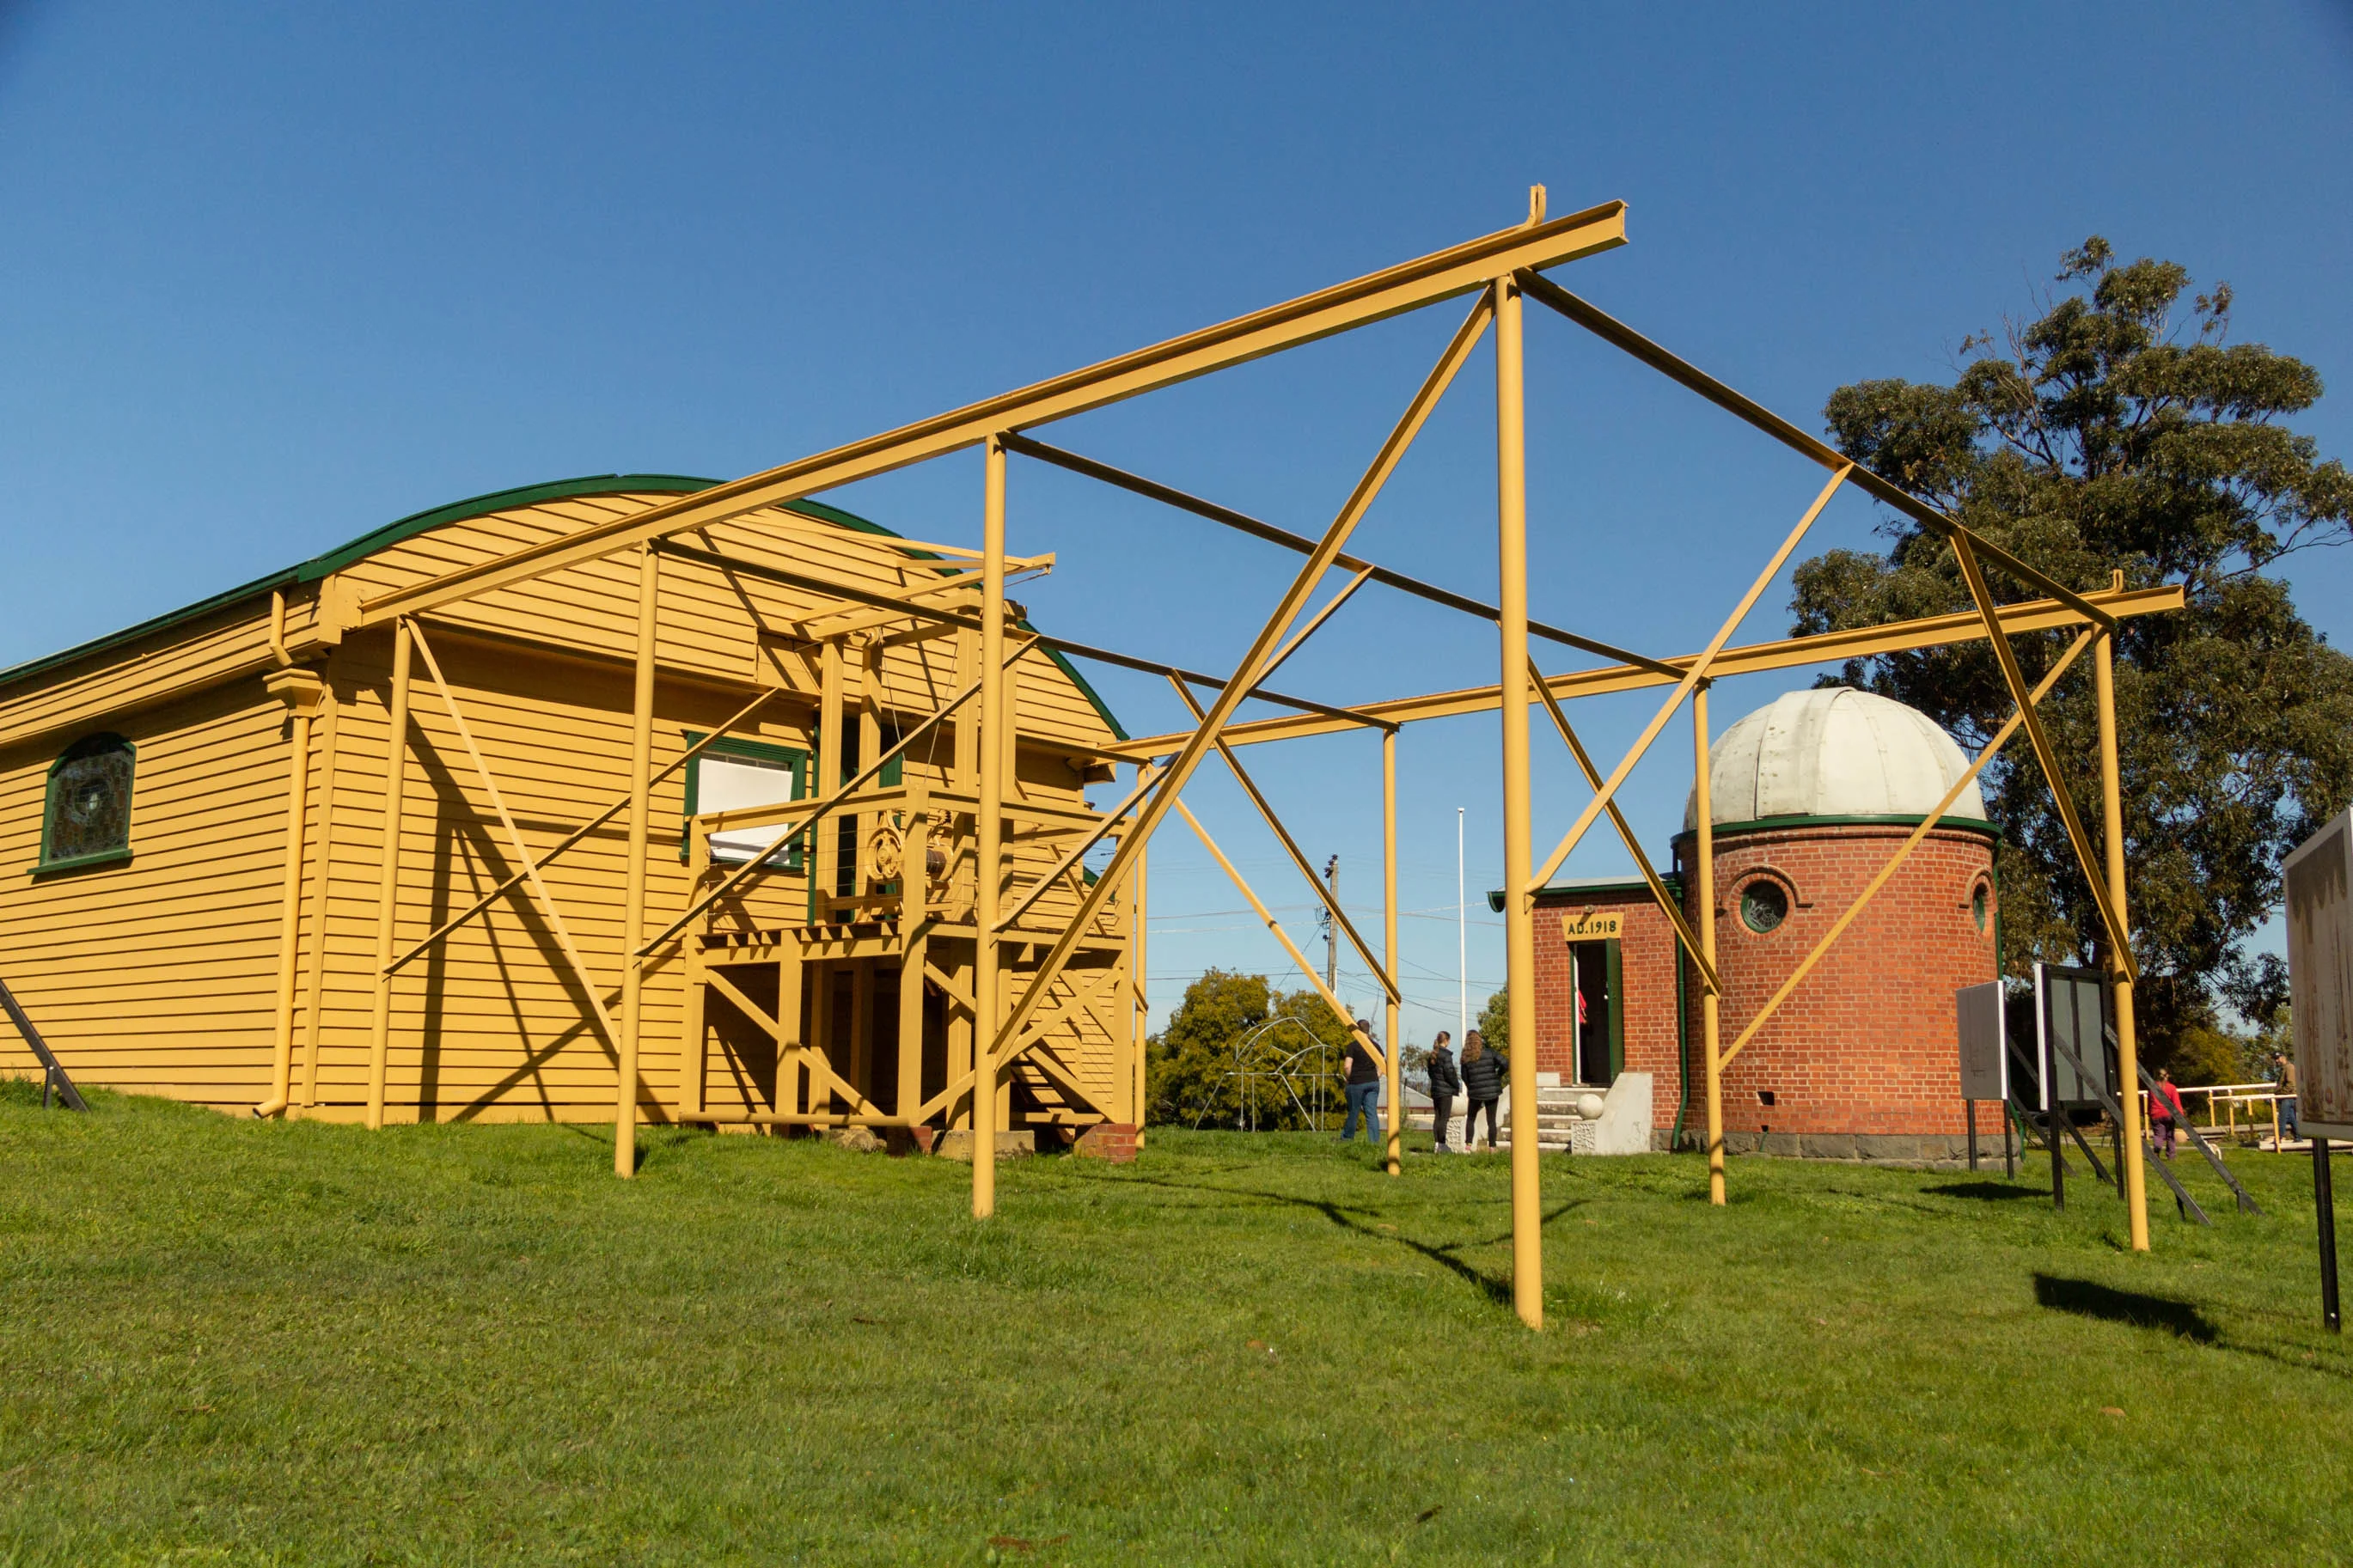 The two buildings of Ballarat Observatory from the outside. Gareth Little-Hales / Wikimedia CCBYSA4.0 